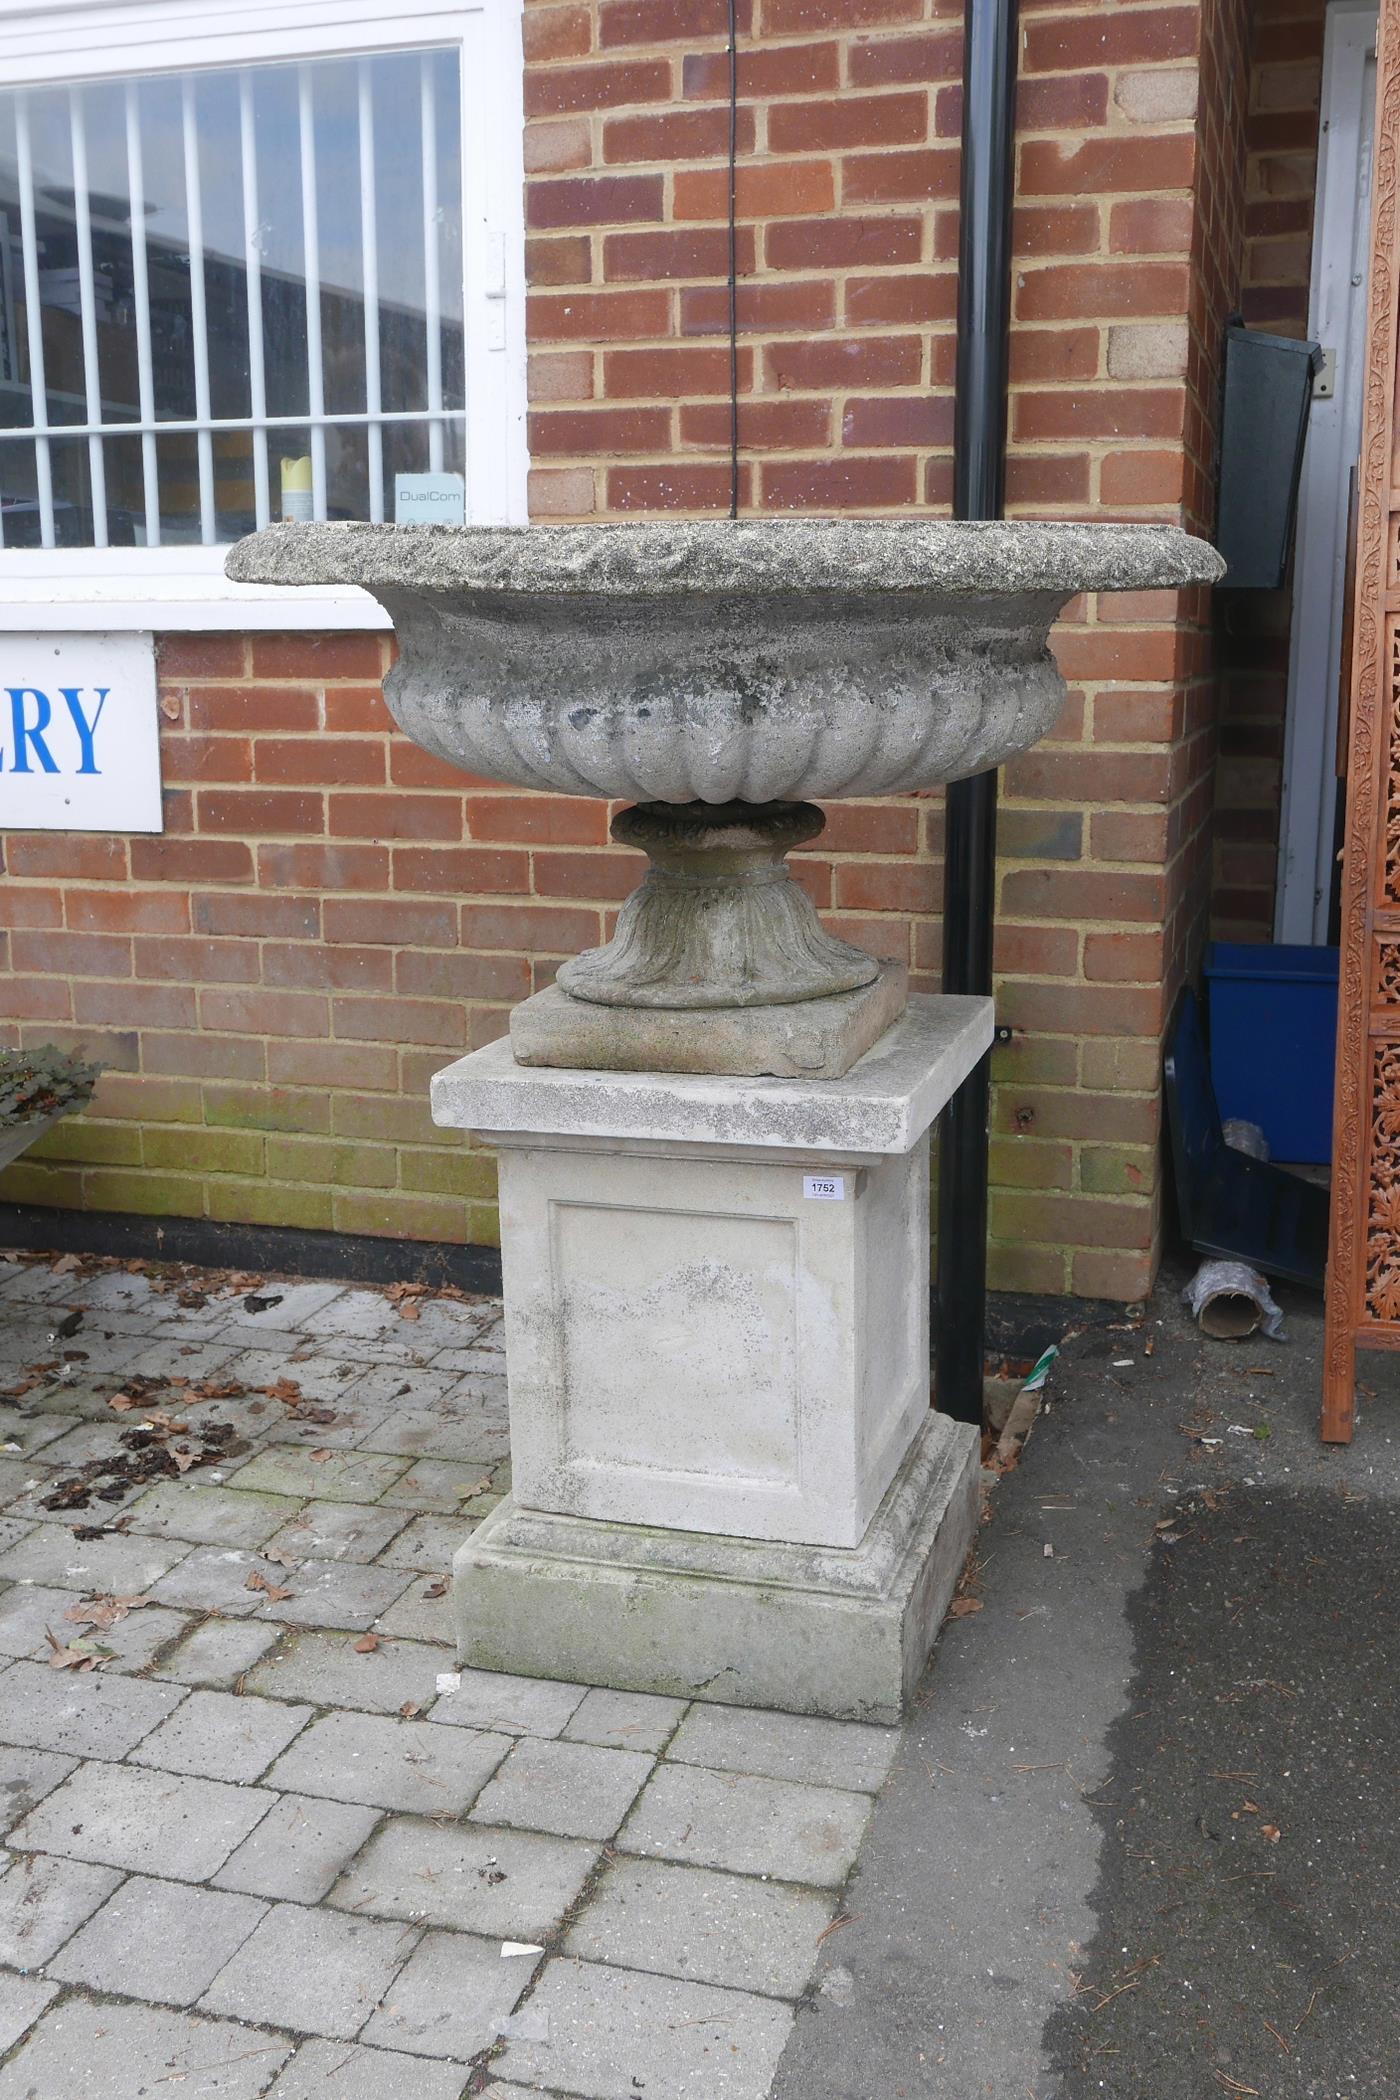 A reconstituted Campagna urn on stand, 44" high x 37½" diameter